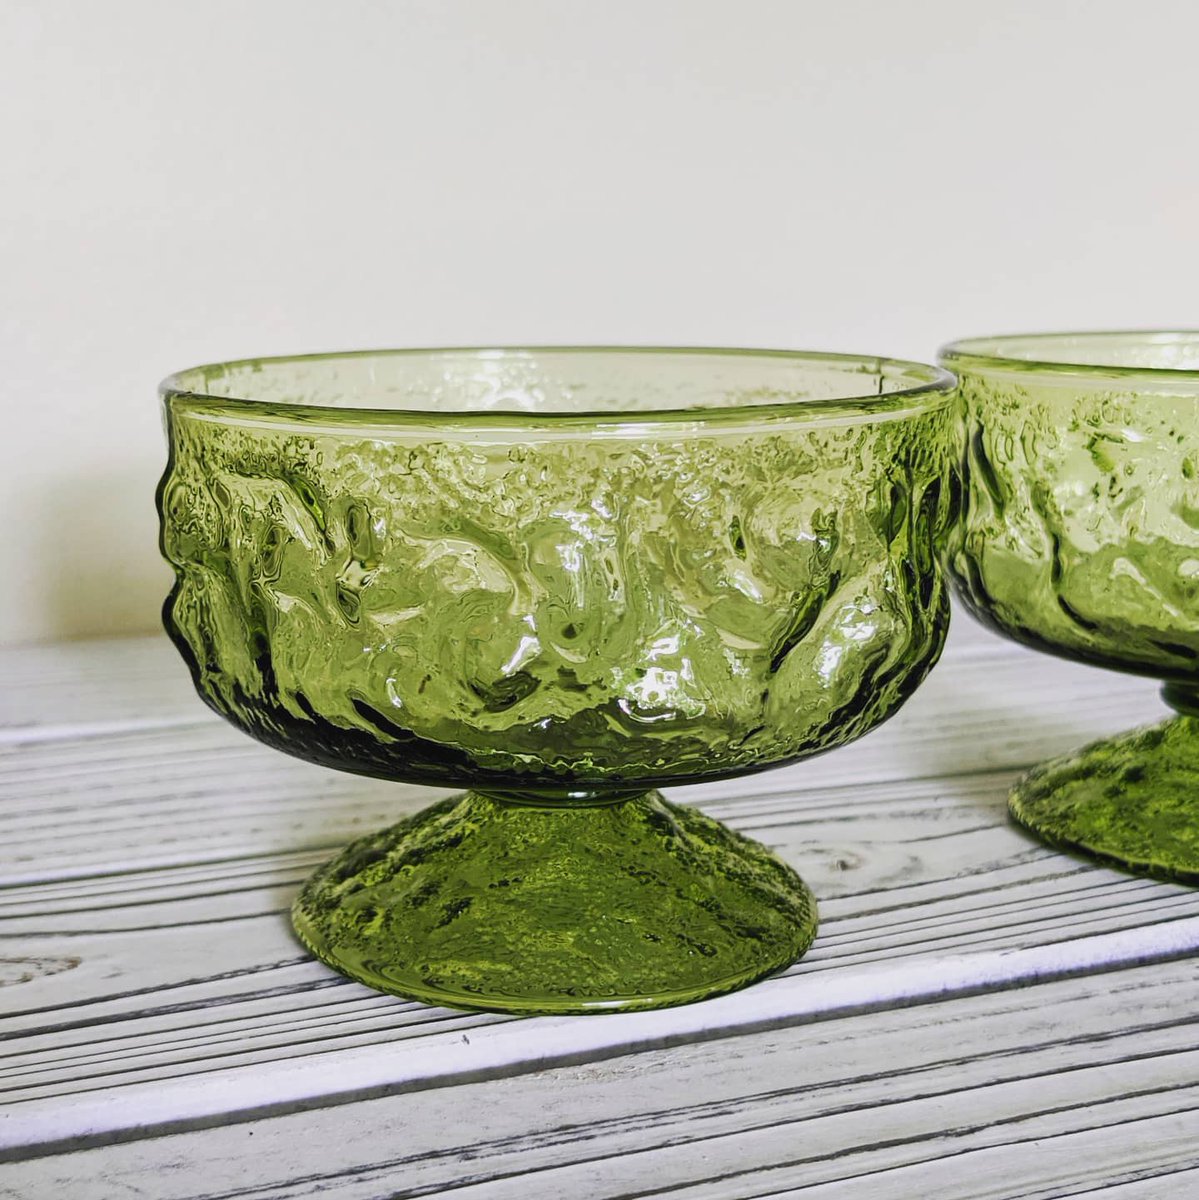 New Anchor Hocking! Set of 2 1960s sherbet dishes. Perfect for summer! 2.75' x 3.75' Link in bio. #vintage #etsy #vintageetsy #lidomilano #greenglass #green #sherbet #sherbetglass #summer #summerdessert #anchorhocking #anchorhockingglass #retro #retrodining #1960s #midcentury